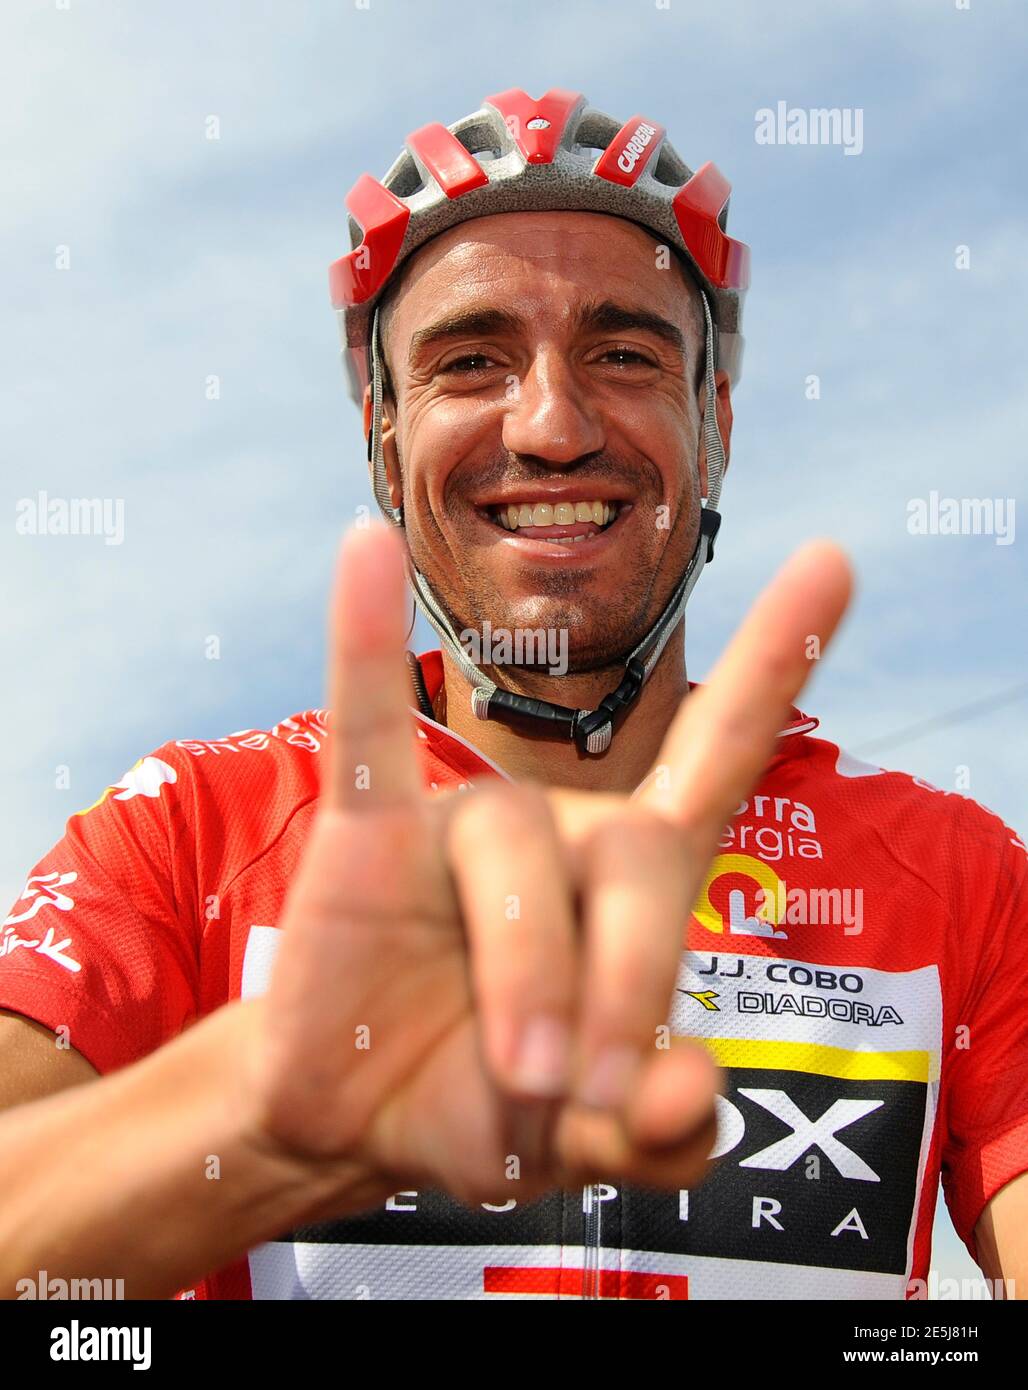 Geox TMC rider Juan Jose Cobo of Spain gestures before the start of the  20th stage of the Tour of Spain "La Vuelta" cycling race between Bilbao and  Vitoria September 10, 2011.